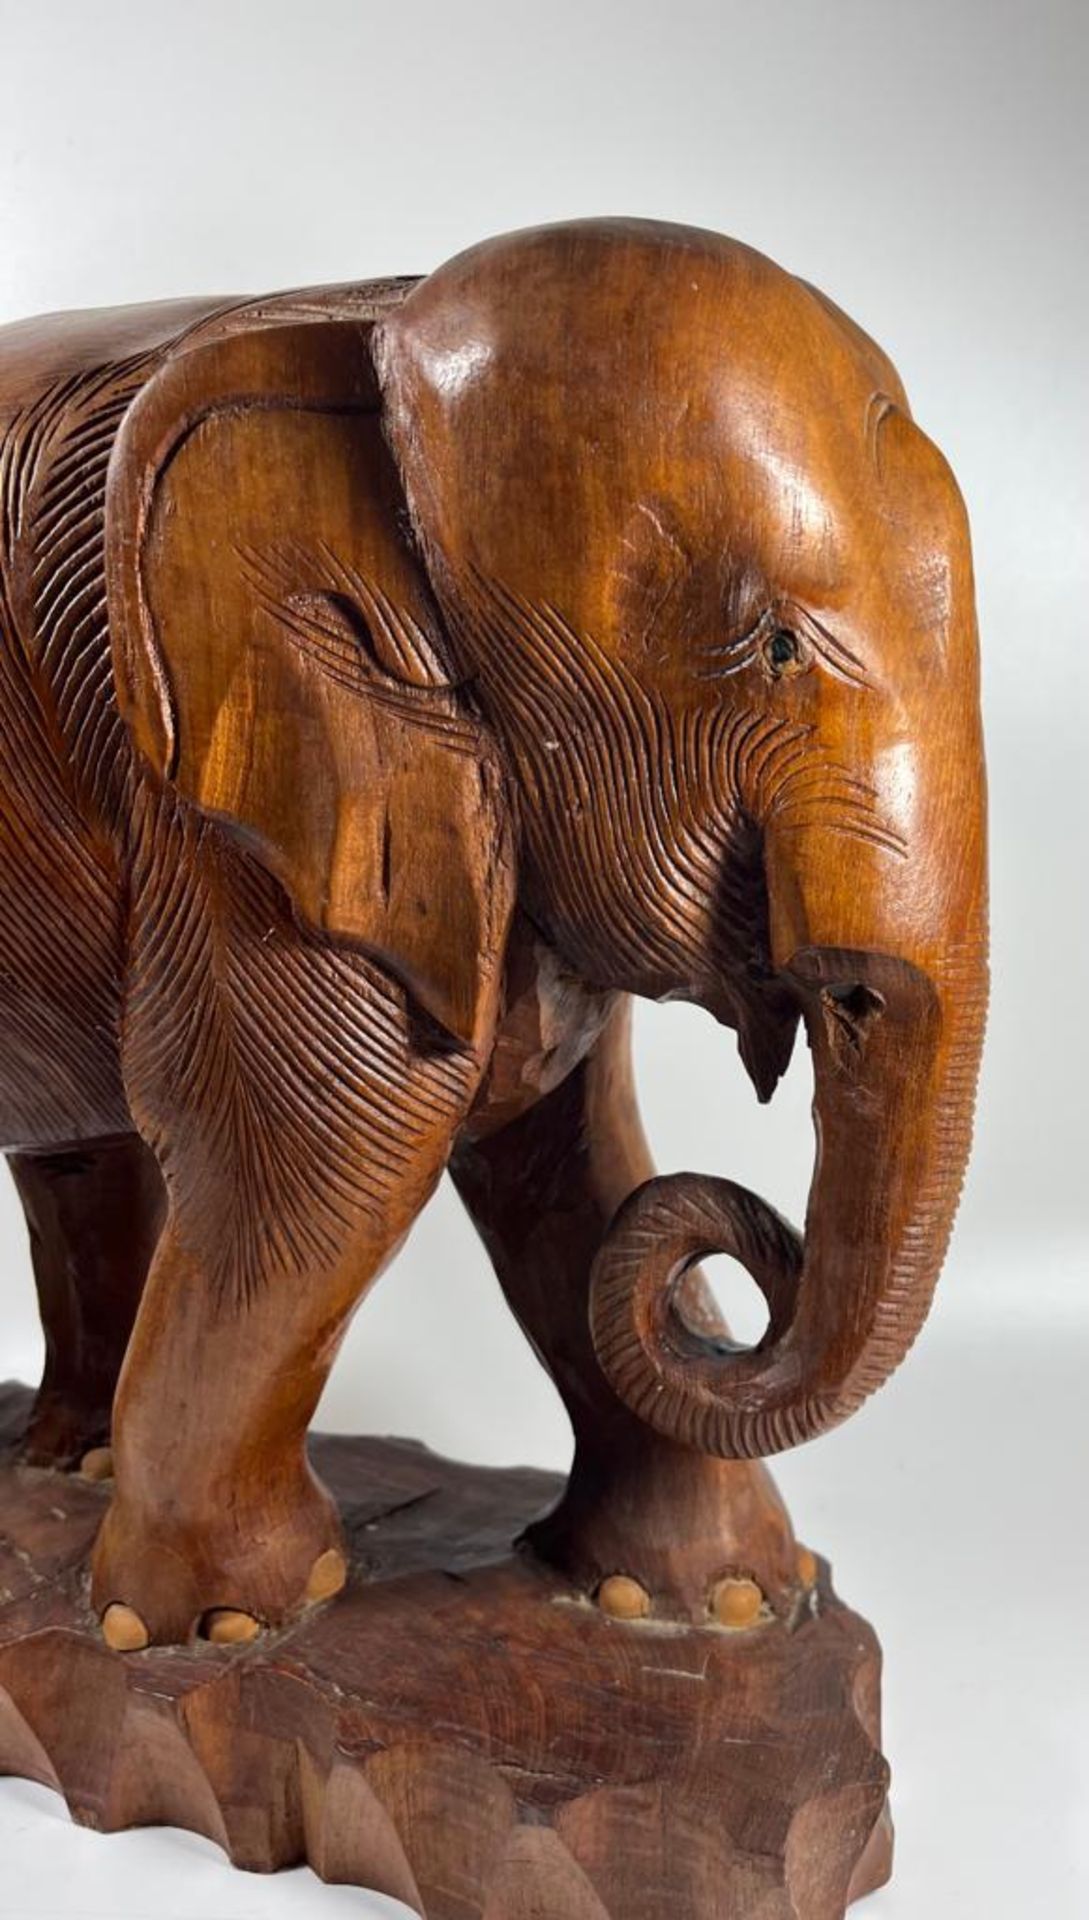 A LARGE AND HEAVY VINTAGE CARVED SOLID TEAK ELEPHANT MODEL, LIKELY CARVED FROM ONE PIECE OF TEAK - Image 4 of 10